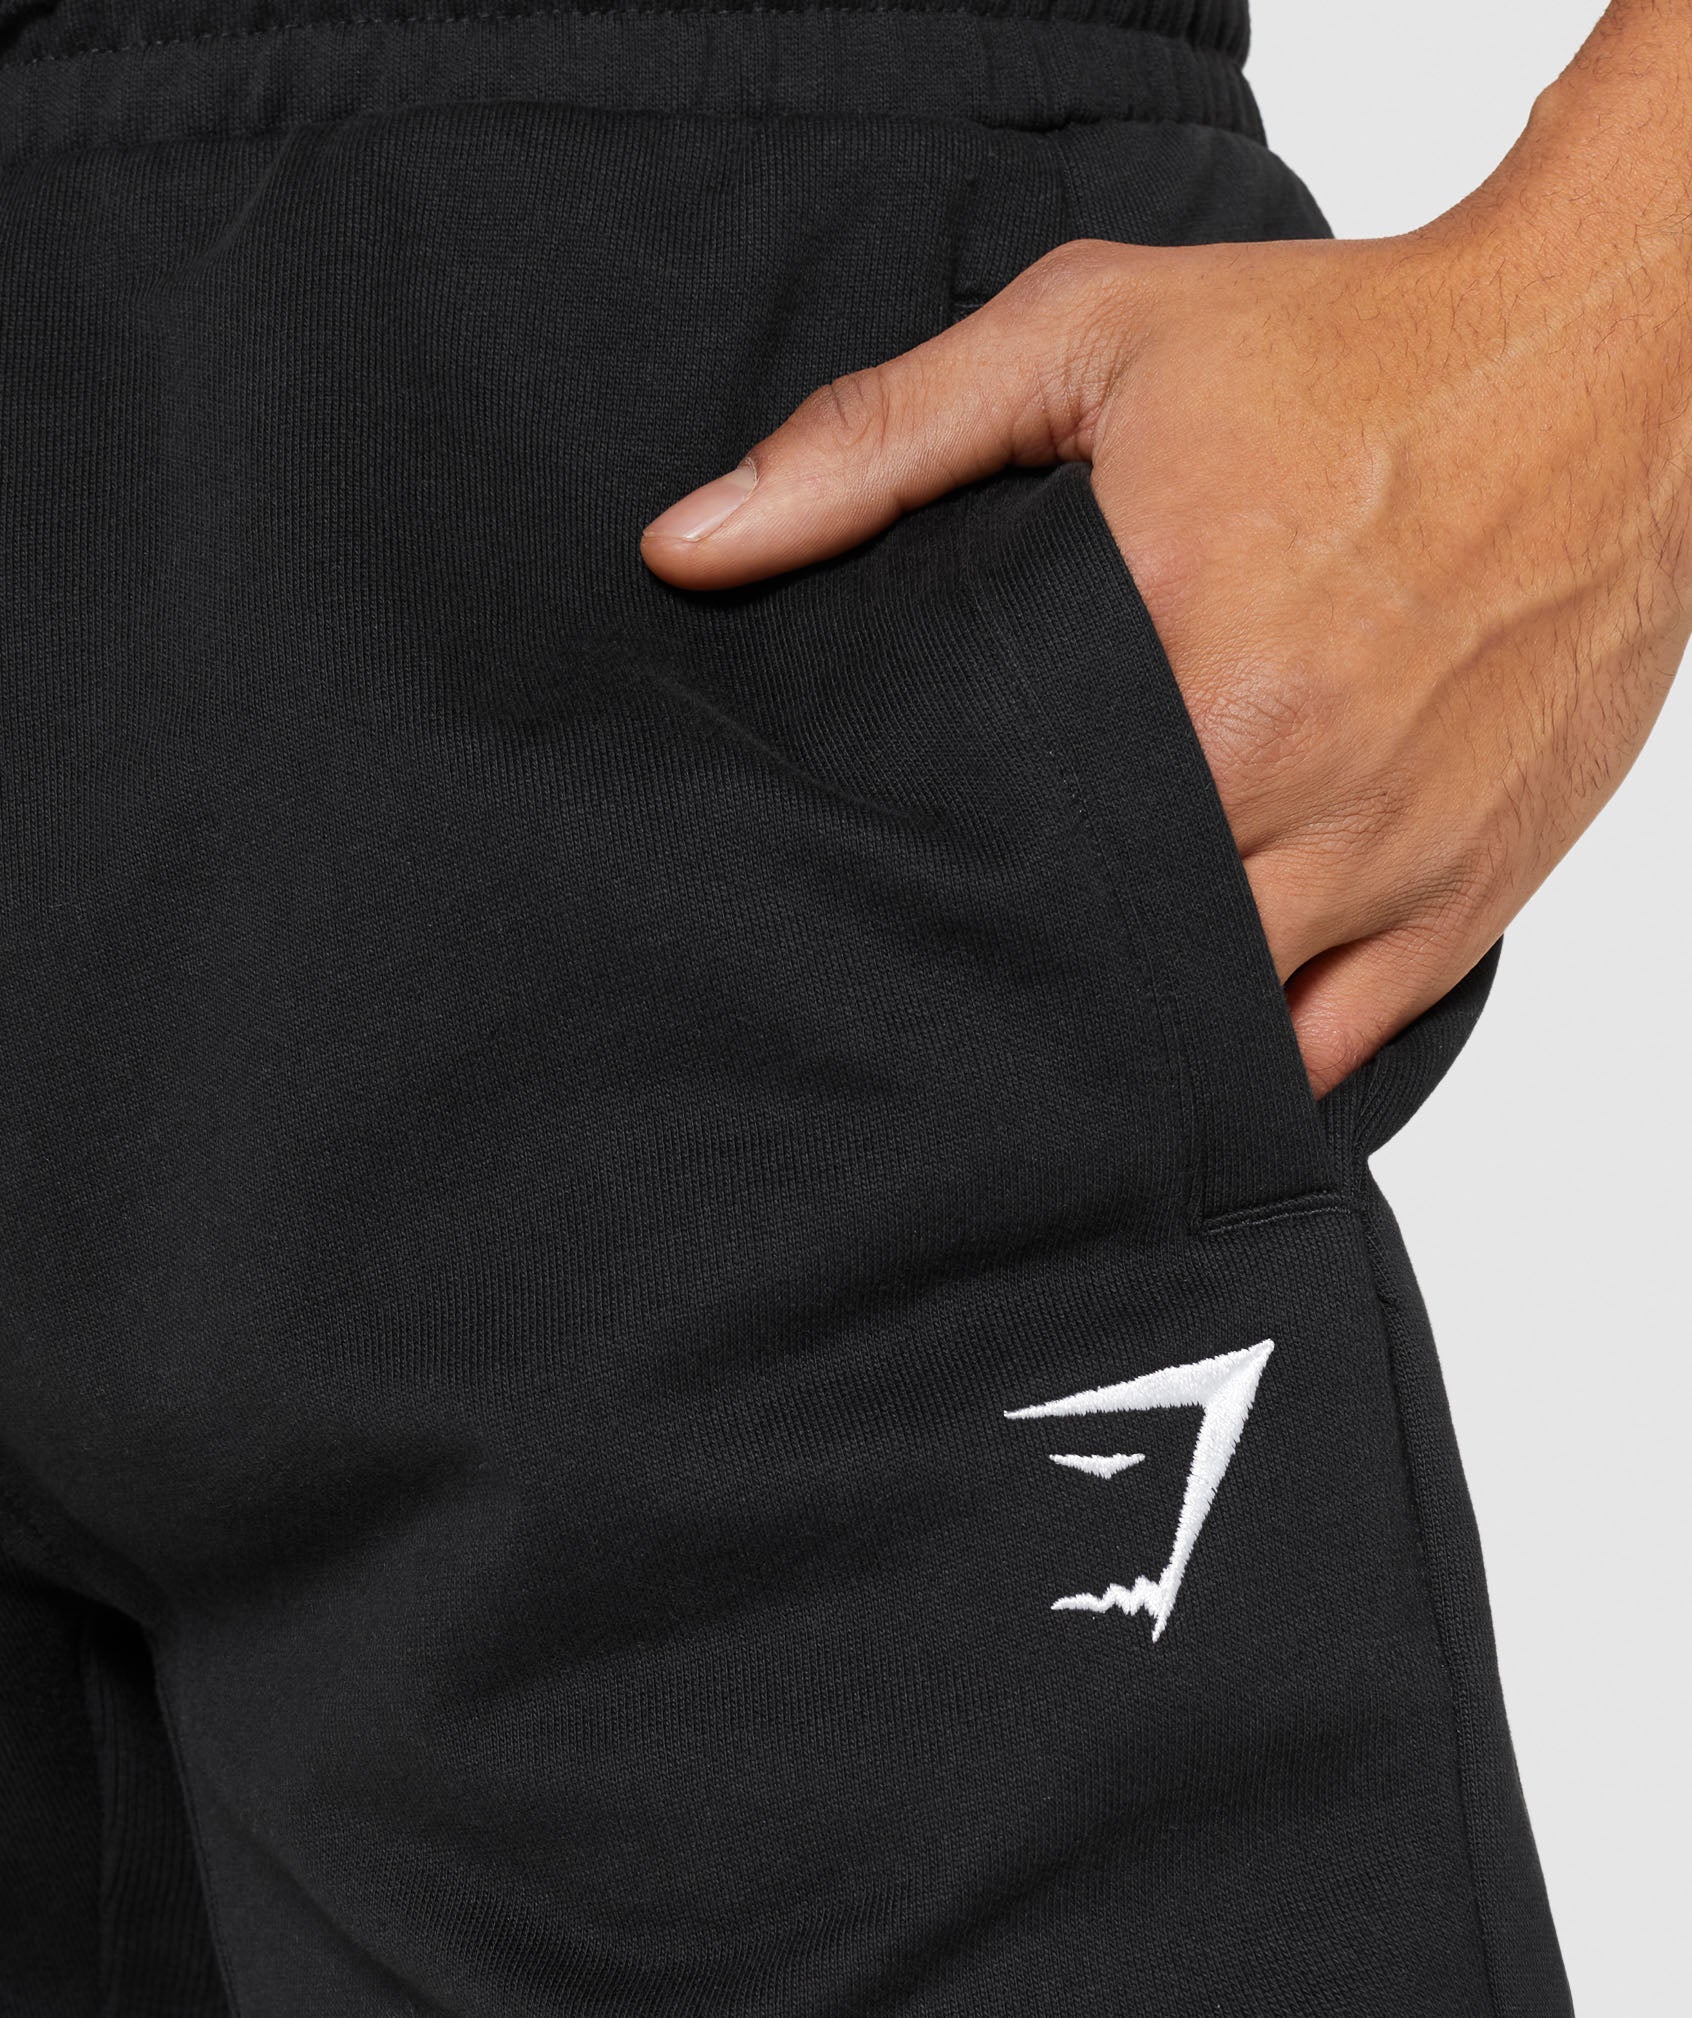 Essential Jogger in Black - view 5